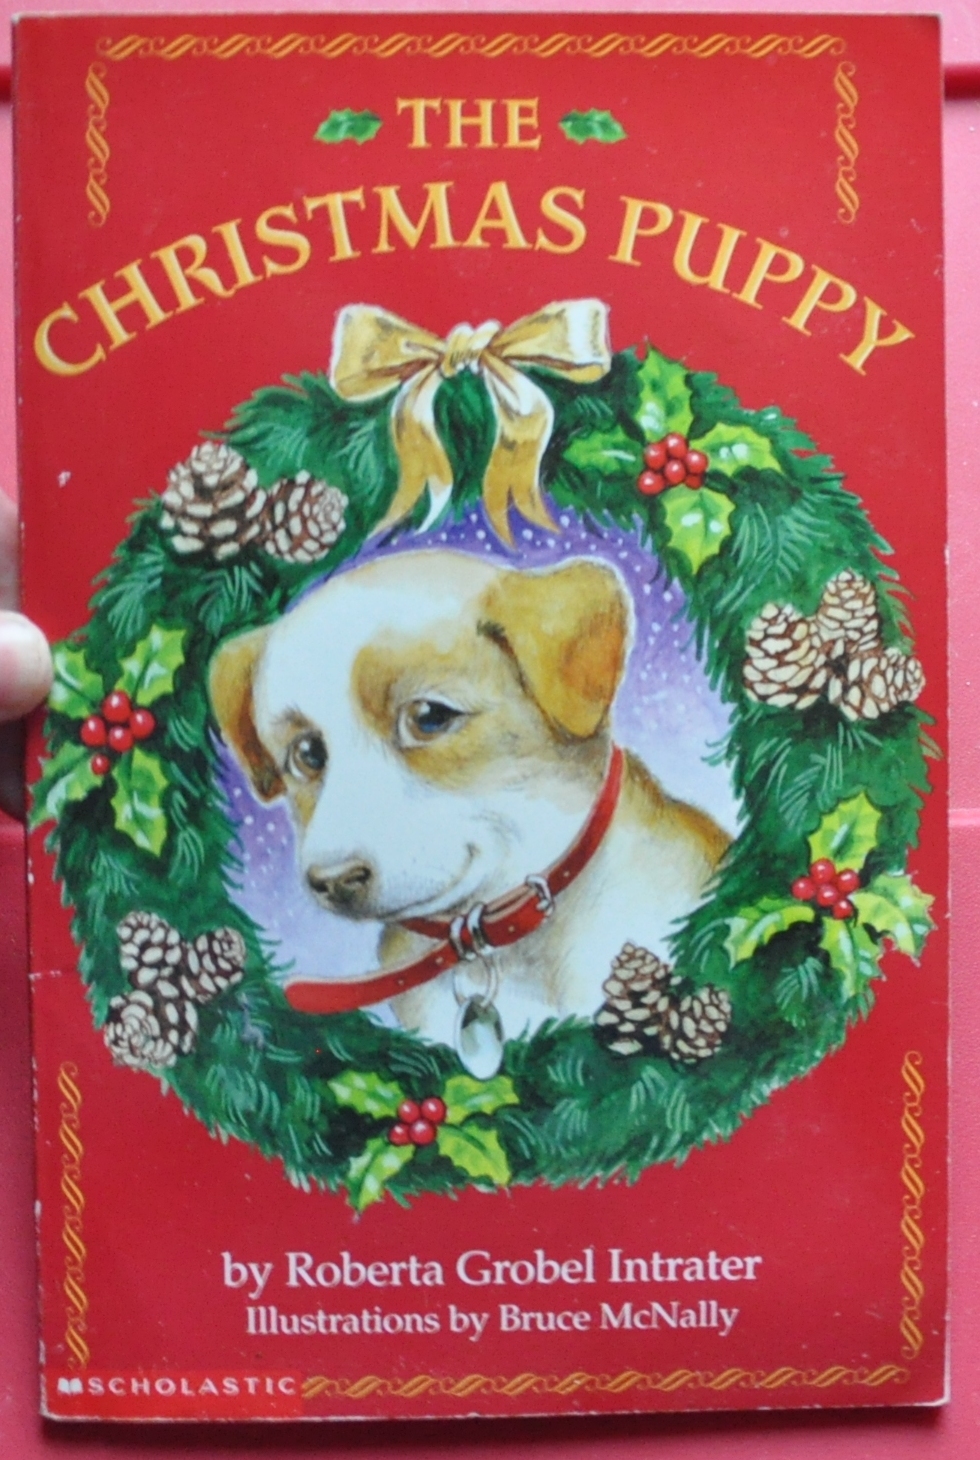 Christmas Puppy by Roberta Grobel Intrater - Children Chapter Book  - $5.00